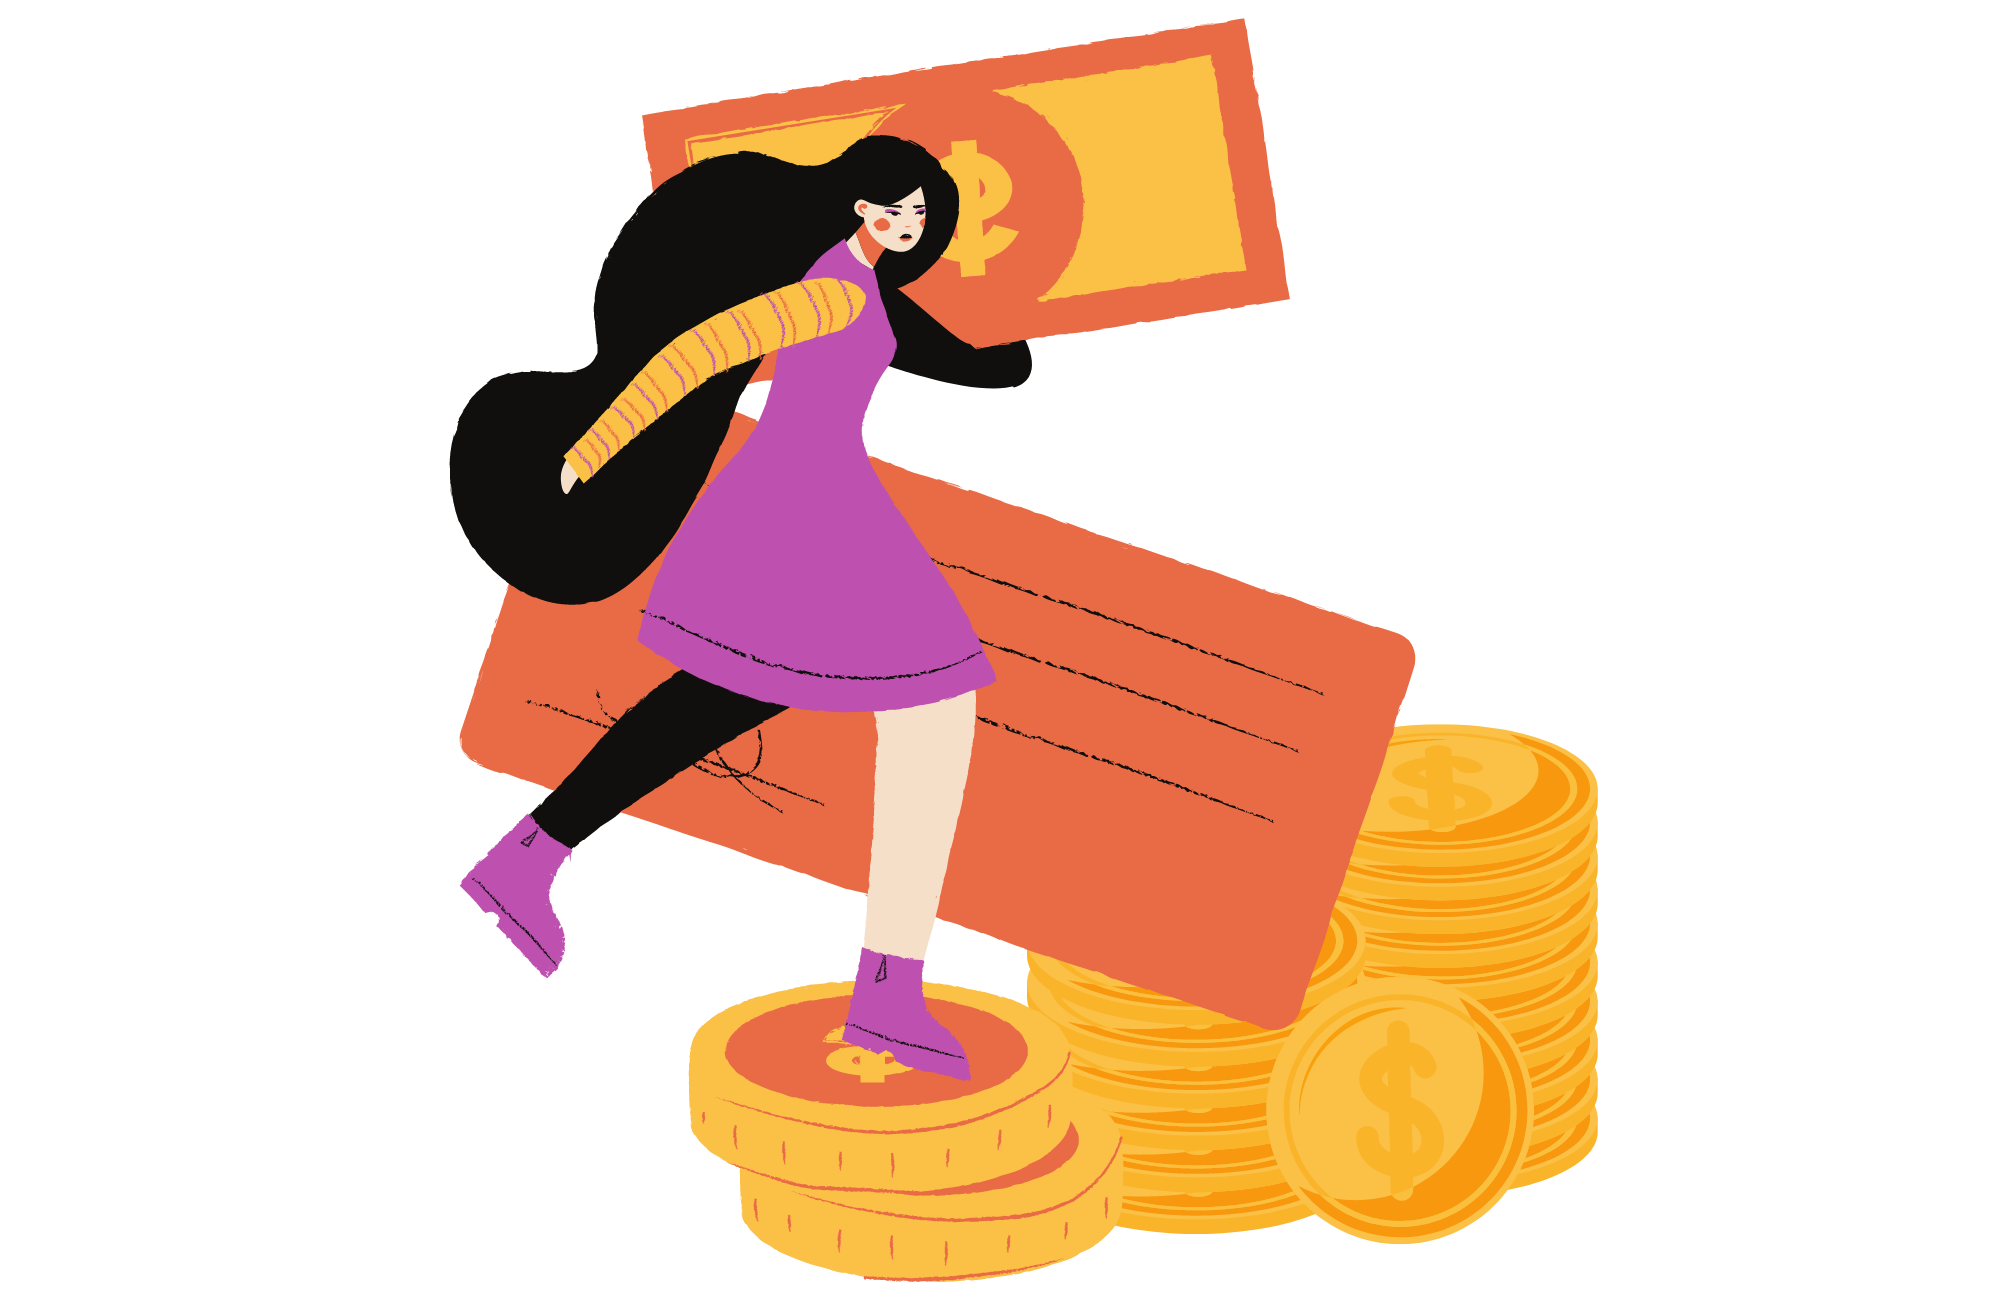 Graphic of woman climbing a tower of coins representing business funding for her lash tech business